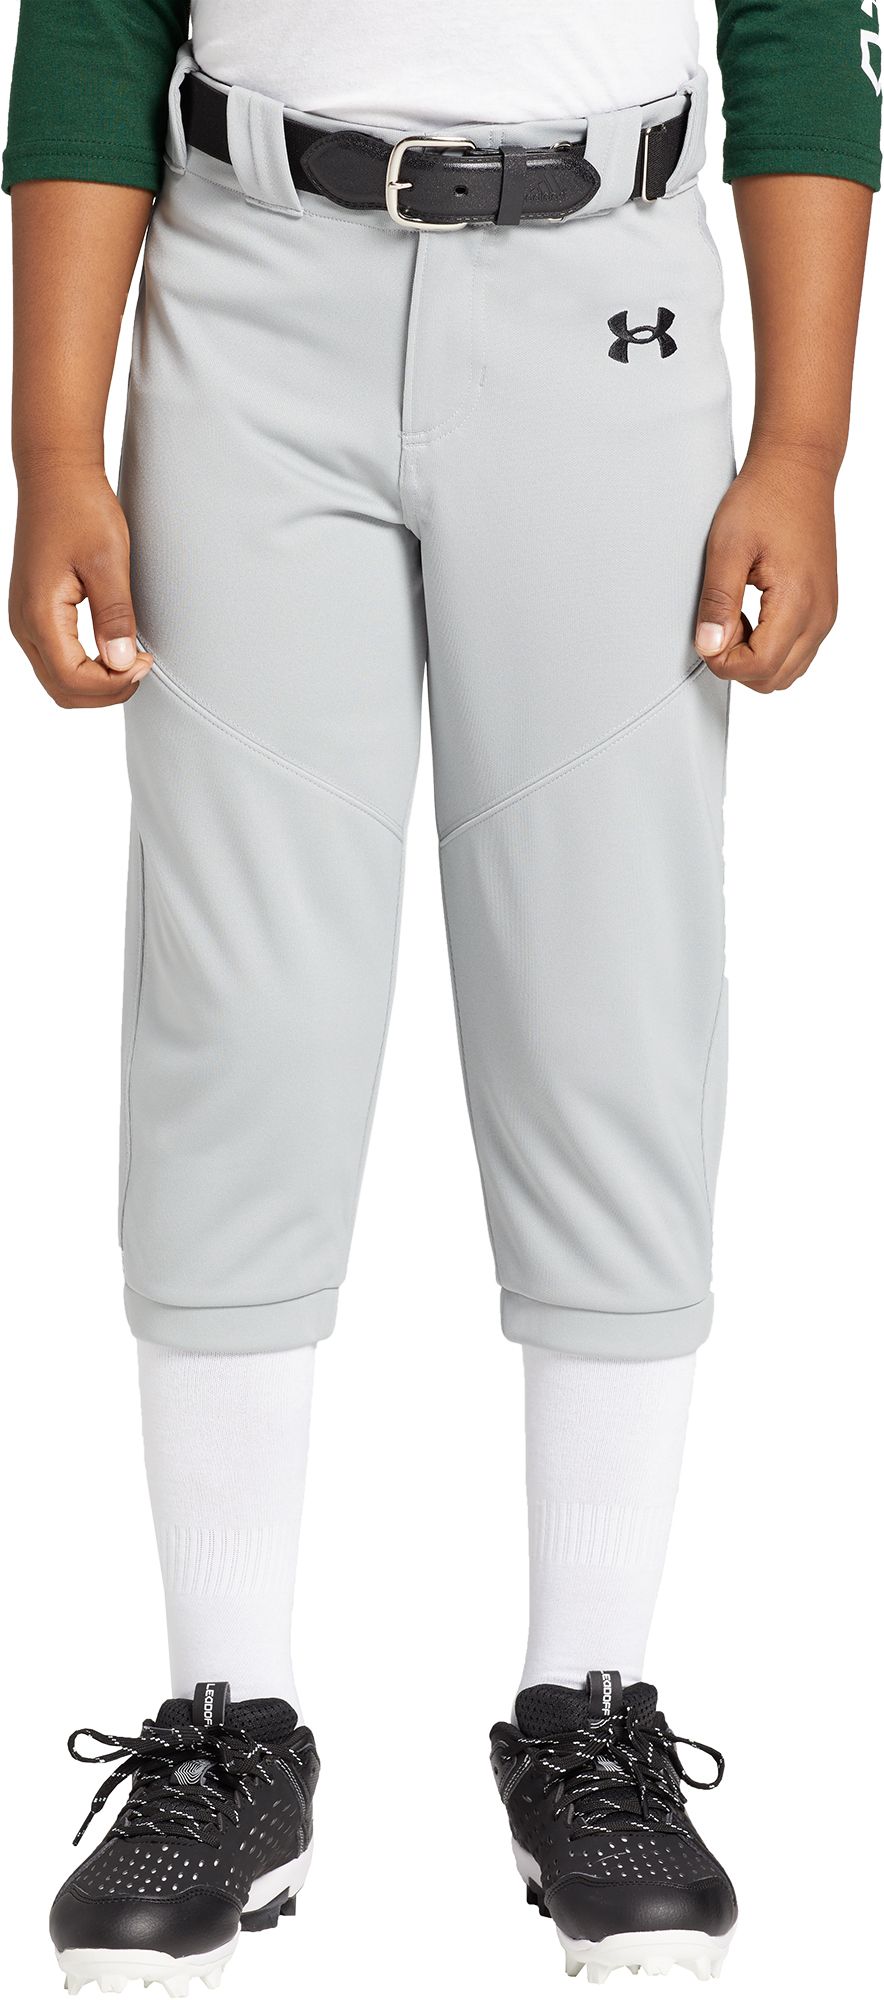 Dick's Sporting Goods Under Armour Boys' Utility Knicker Baseball Pants